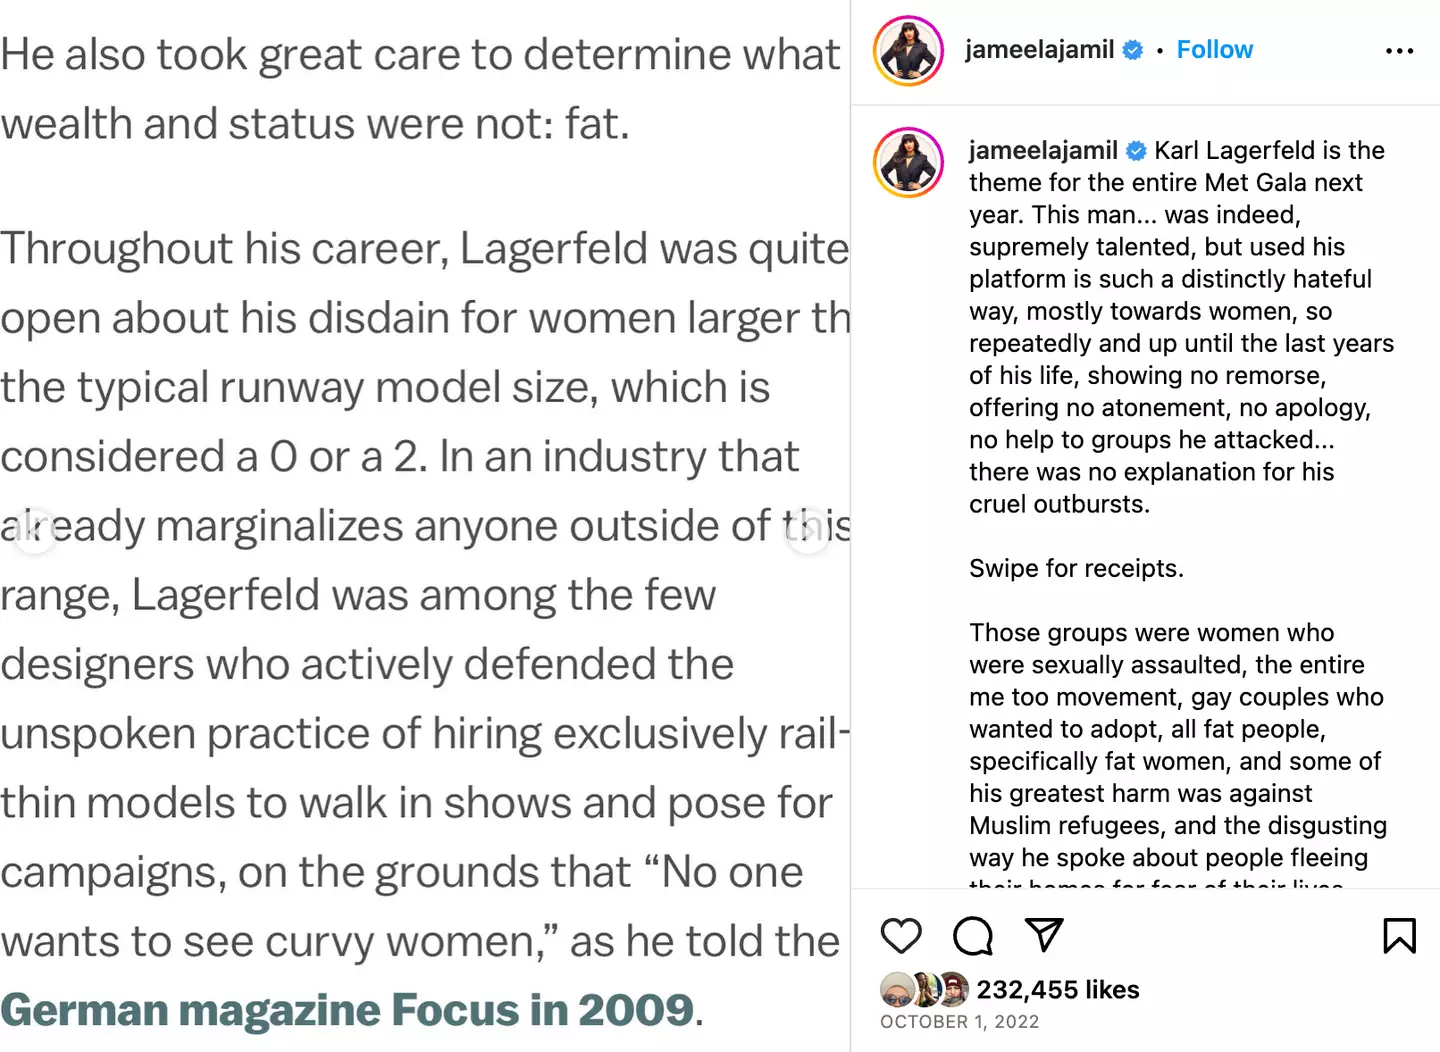 Jamil criticised Lagerfeld in an Instagram post.